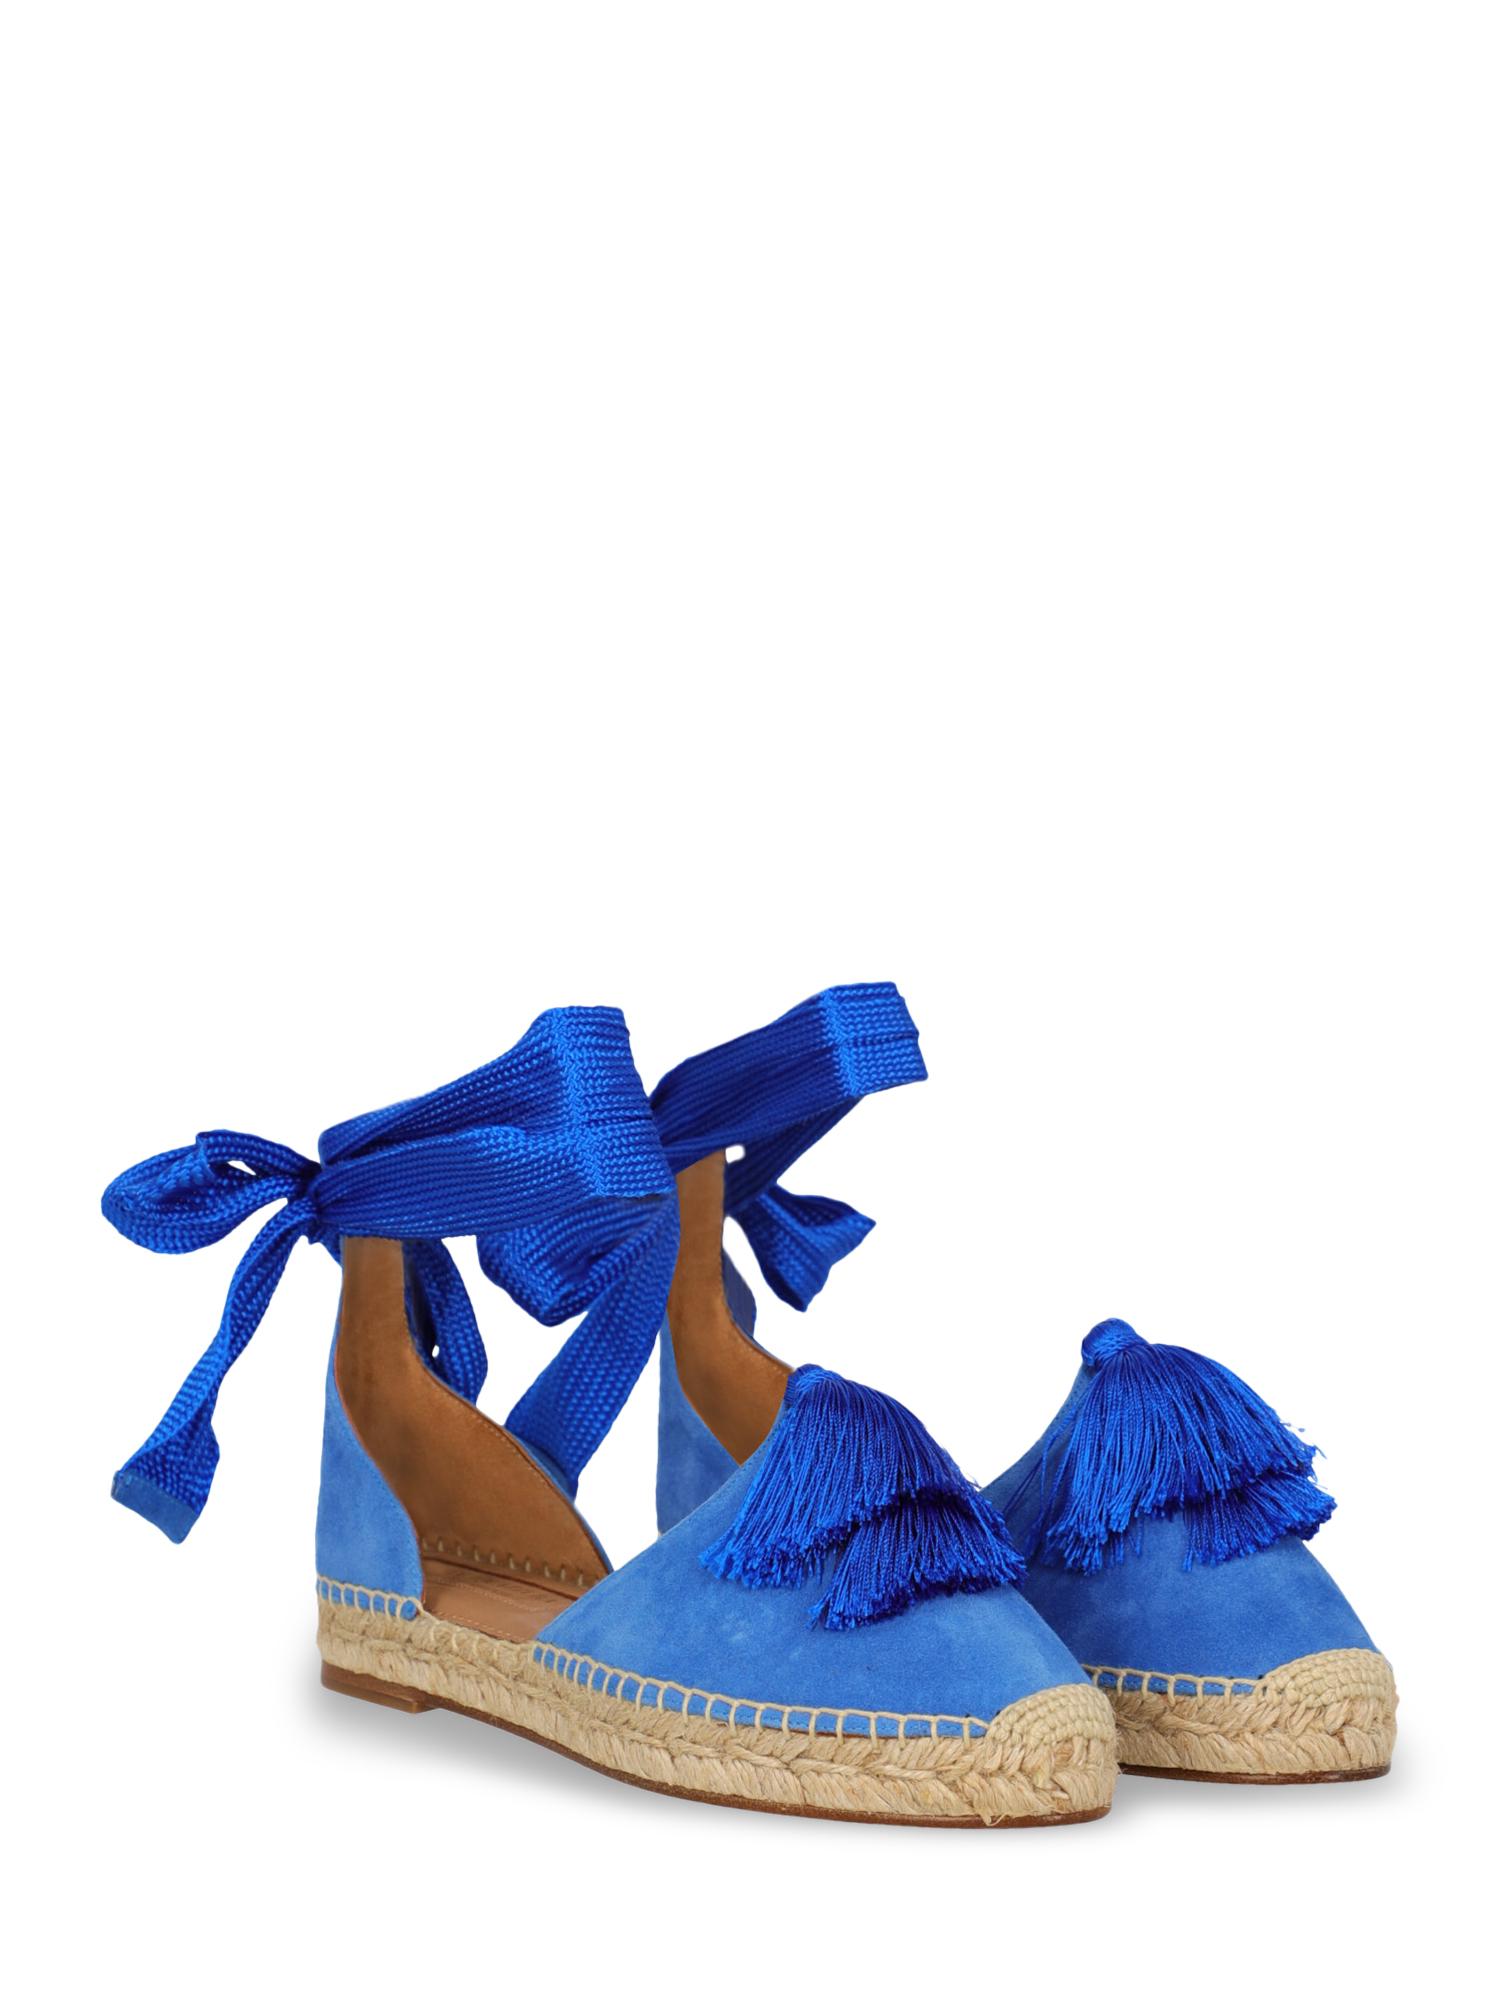 Espadrilles, leather, solid color, suede, lace-up, branded insole, suede lining, tassel detail. Product Condition: Excellent. Sole: negligible scratch
